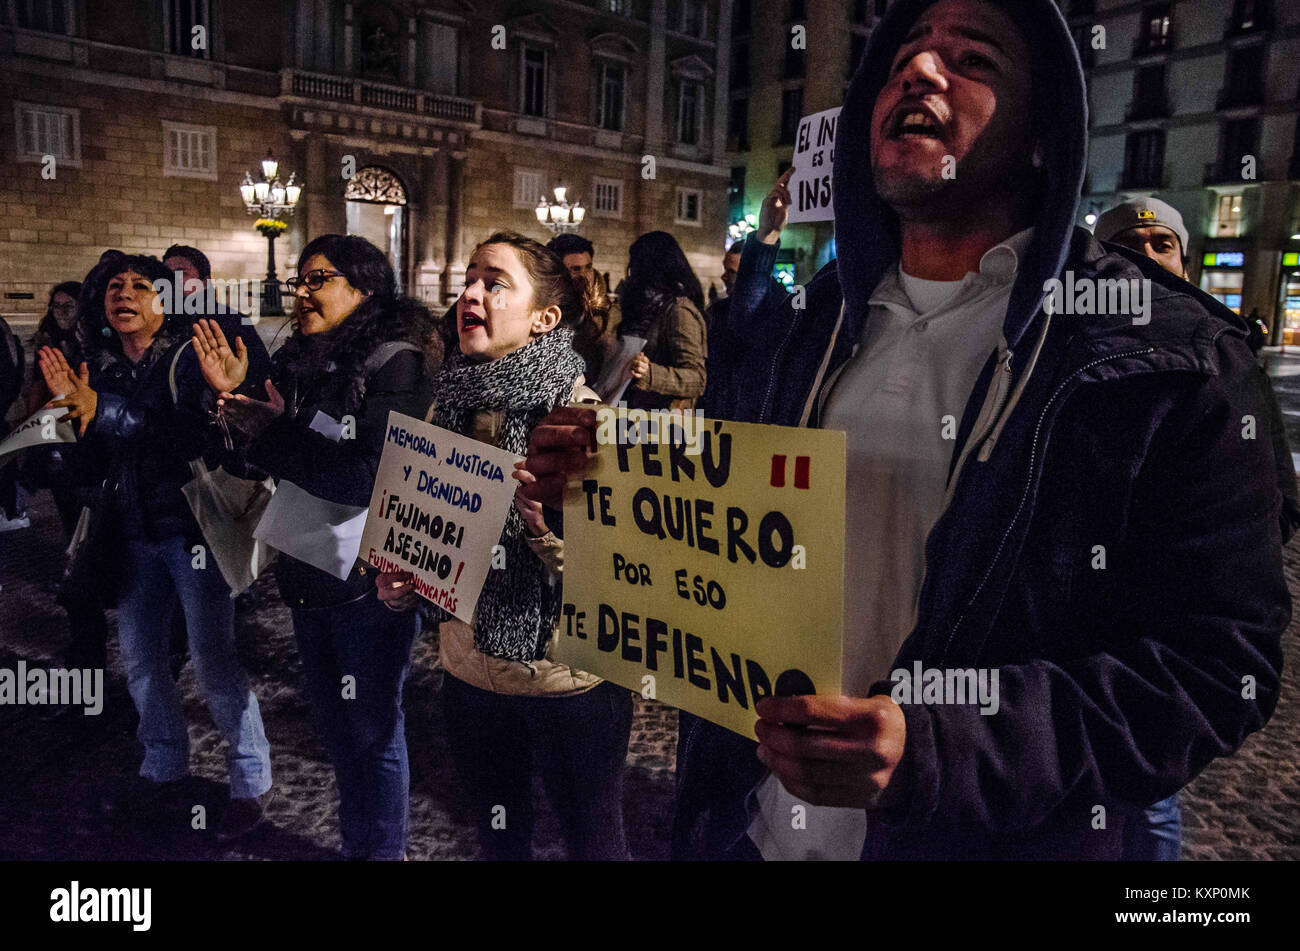 Barcelona, Catalonia, Spain. 11th Jan, 2018. Several demonstrators displayed posters against Fujimori and his crimes. A group of resident Peruvians in Barcelona have gathered to protest on Barcelona's Sant Jaume square to show their rejection of the early release of Alberto Fujimori. This is the second protest against the pardon granted by the current President of the PerÃº Pedro Pablo Kucznski to the former President Alberto Fujimori. Credit: Paco Freire/SOPA/ZUMA Wire/Alamy Live News Stock Photo